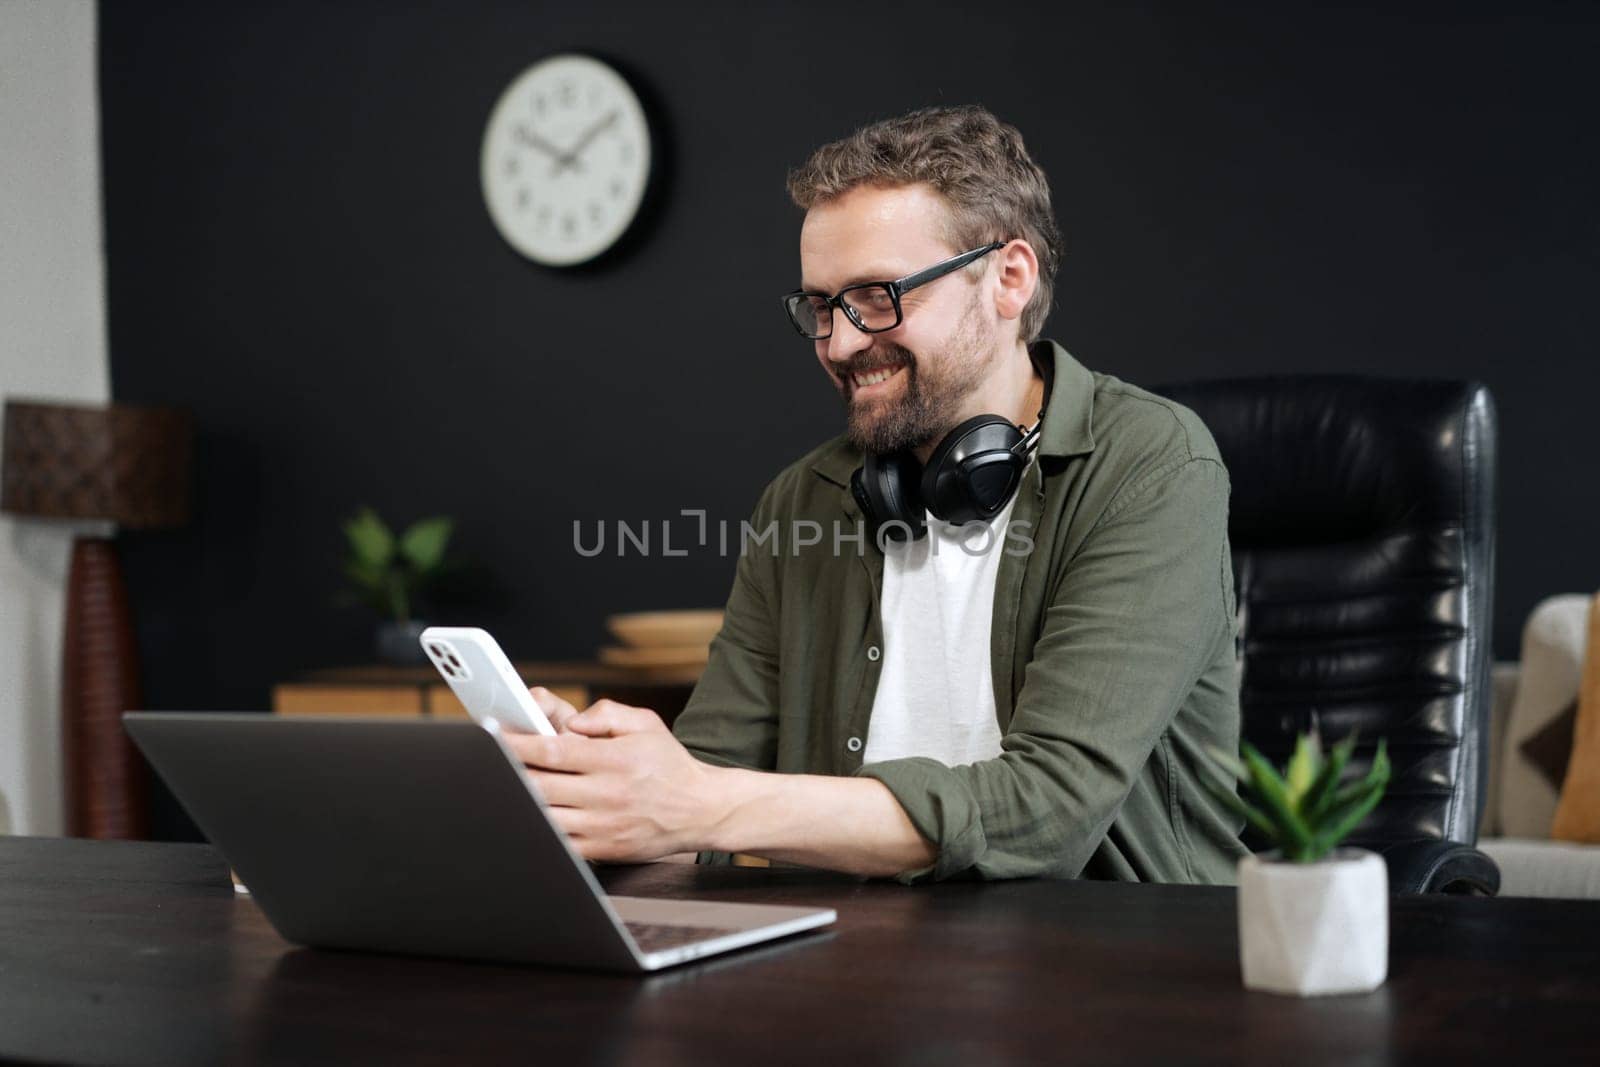 Concept of communication and technology in workplace. European man texting on mobile phone while working on laptop in office. Multitasking, concentration, and seamless connection between two devices. High quality photo